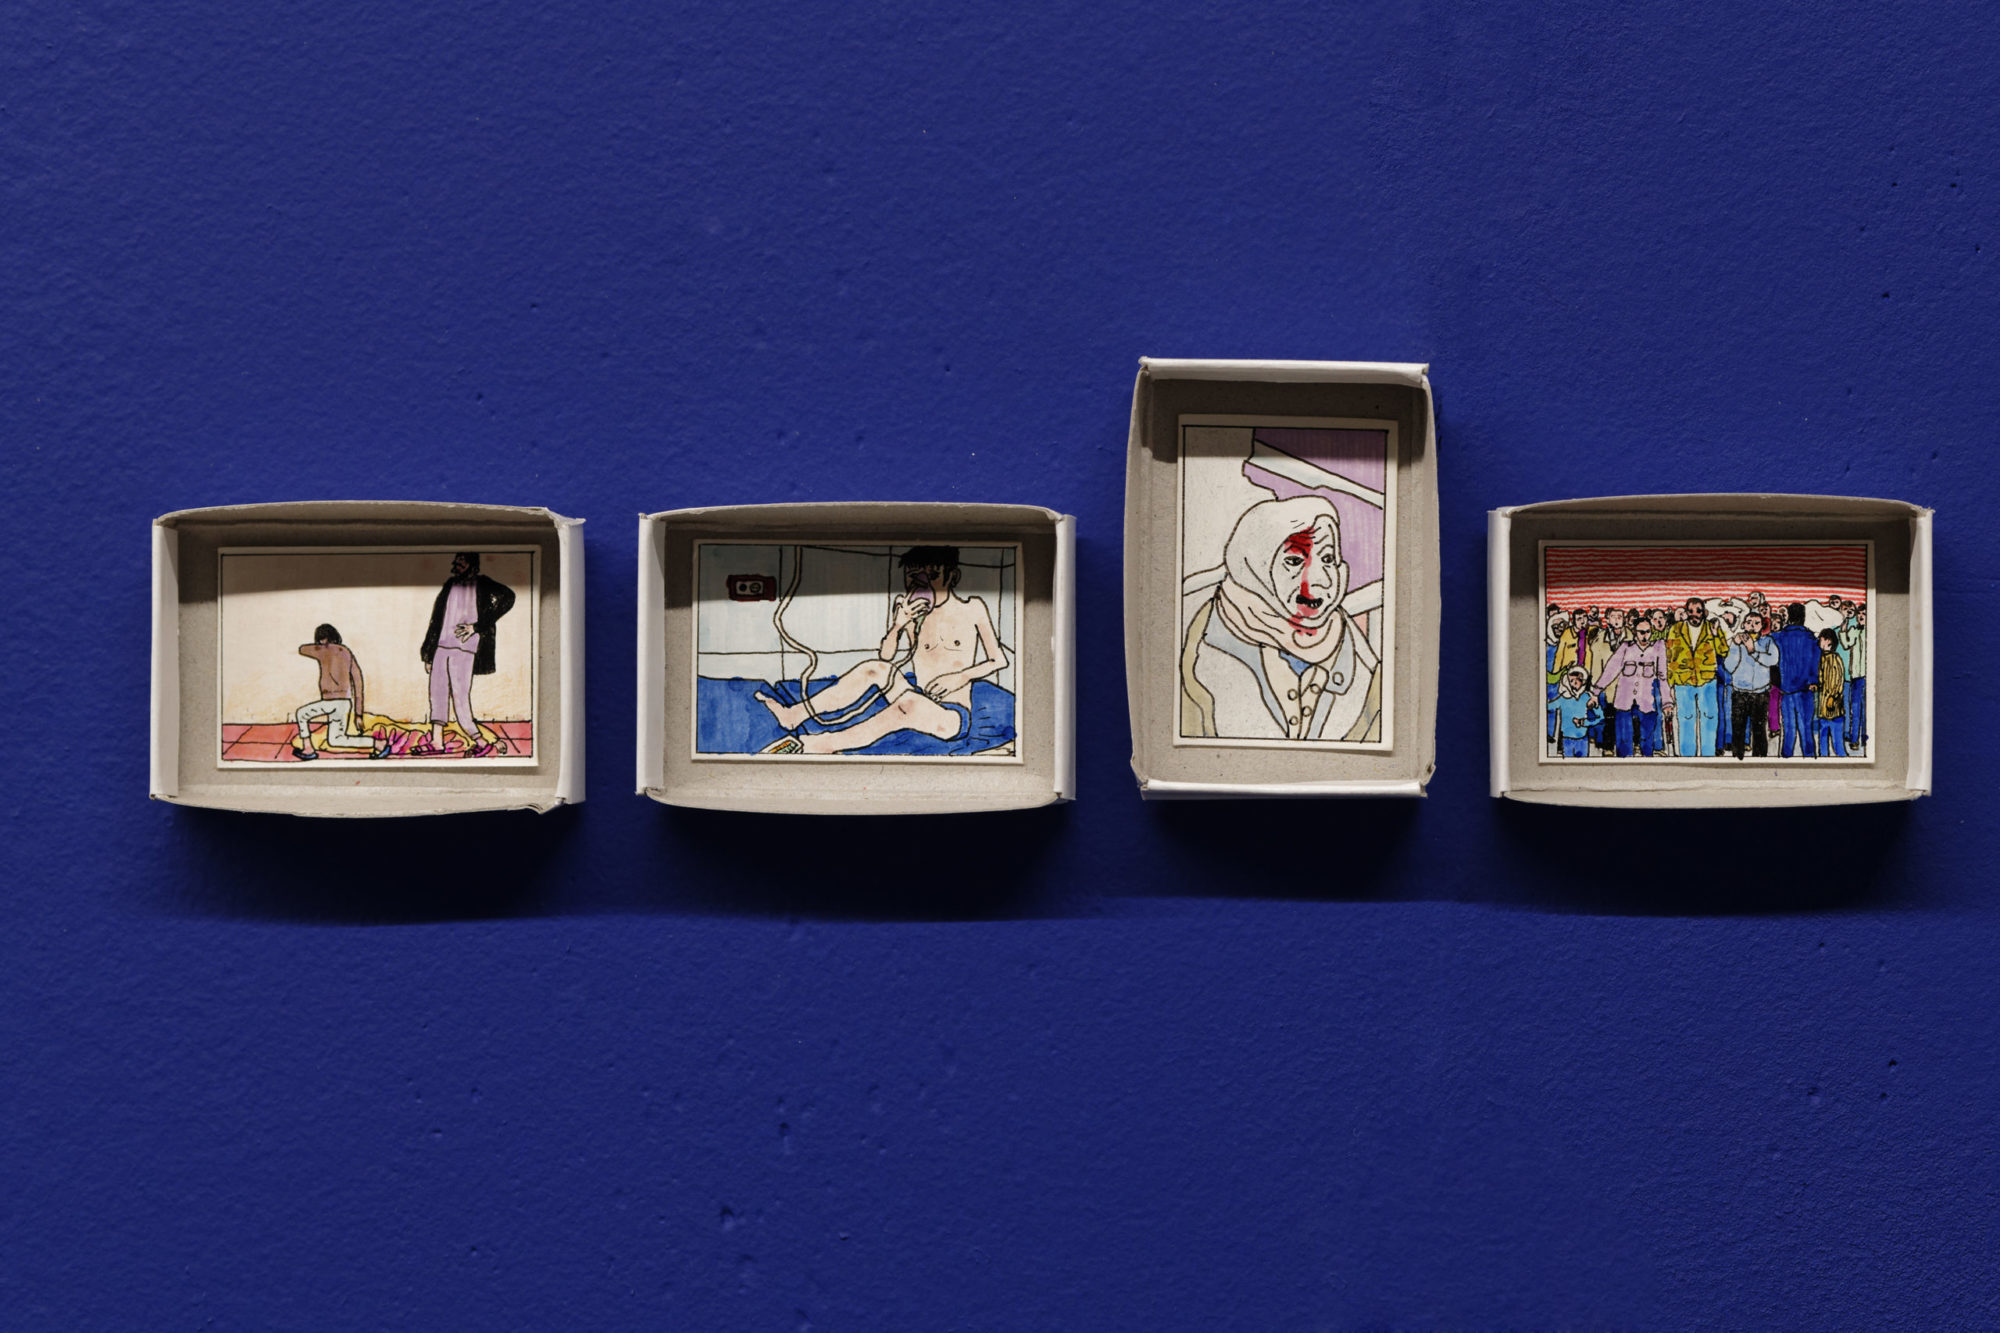 four works hang on a deep blue wall; the works are outlined drawings framed by the lid to a shoebox